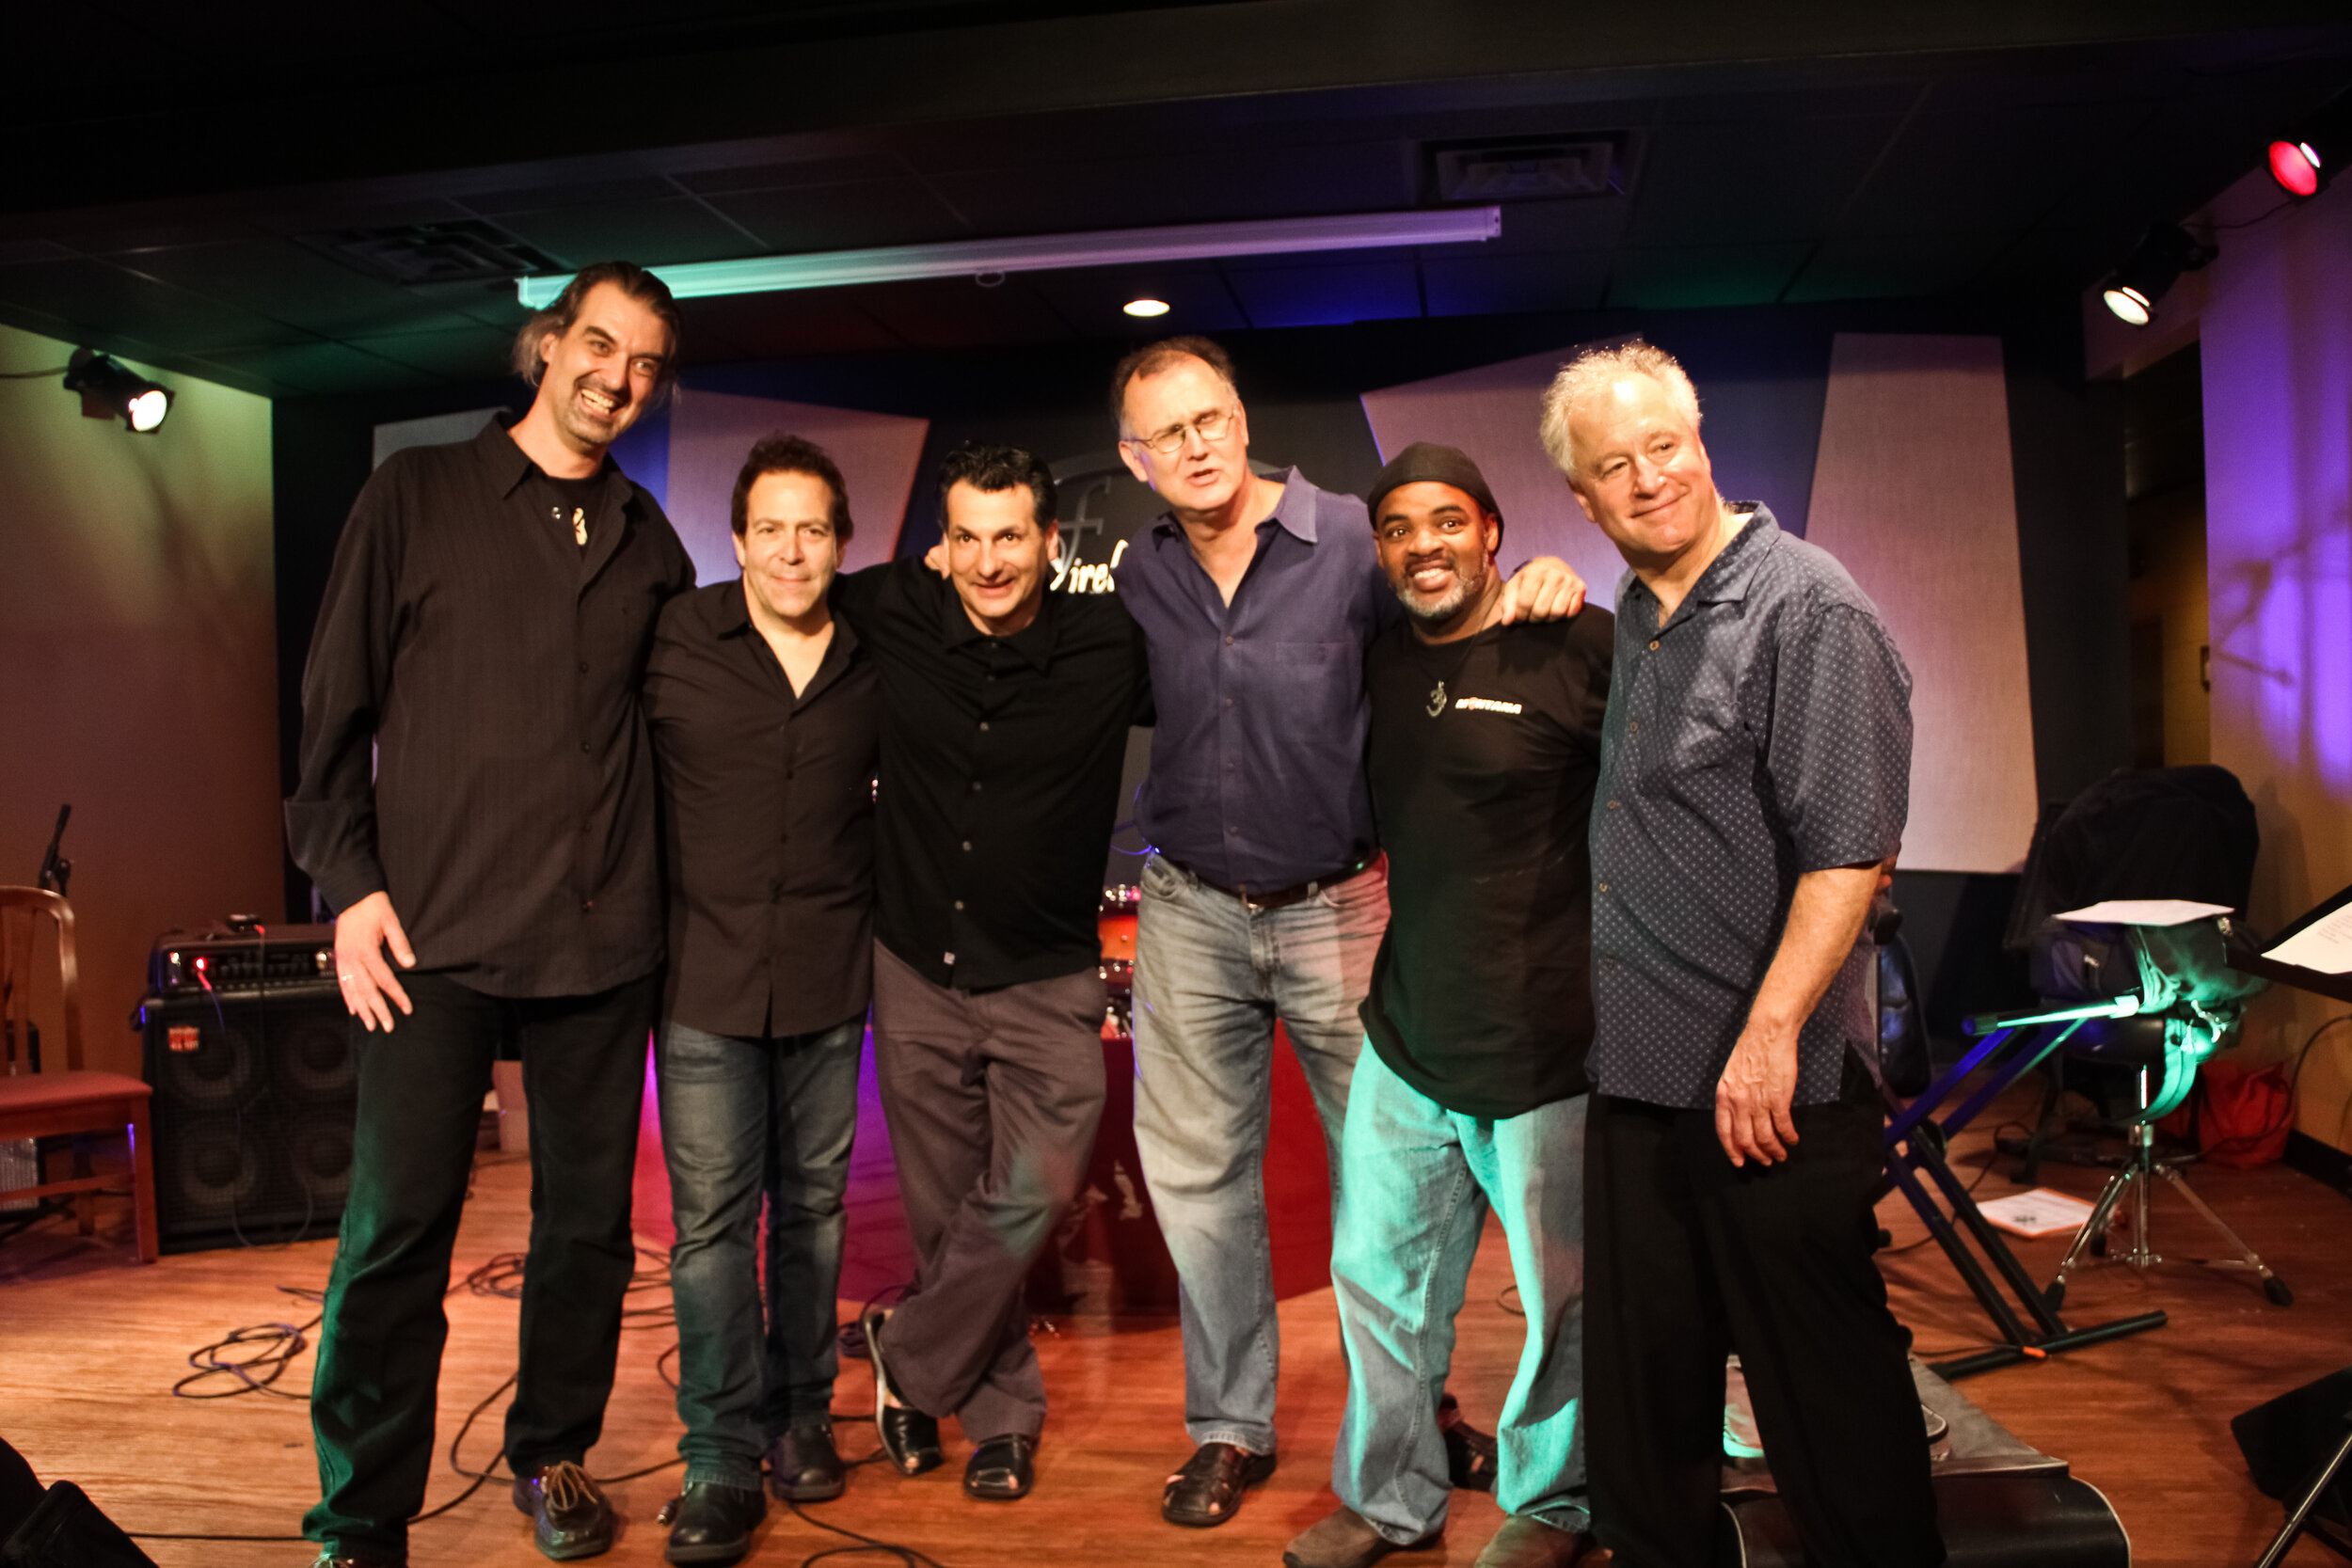 Patrick Pfeiffer, Mike Visceglia, John Patitucci, Dave Meade, Anthony Wellington and Mitch Schechter at Bass Immersion Day Summer 2011